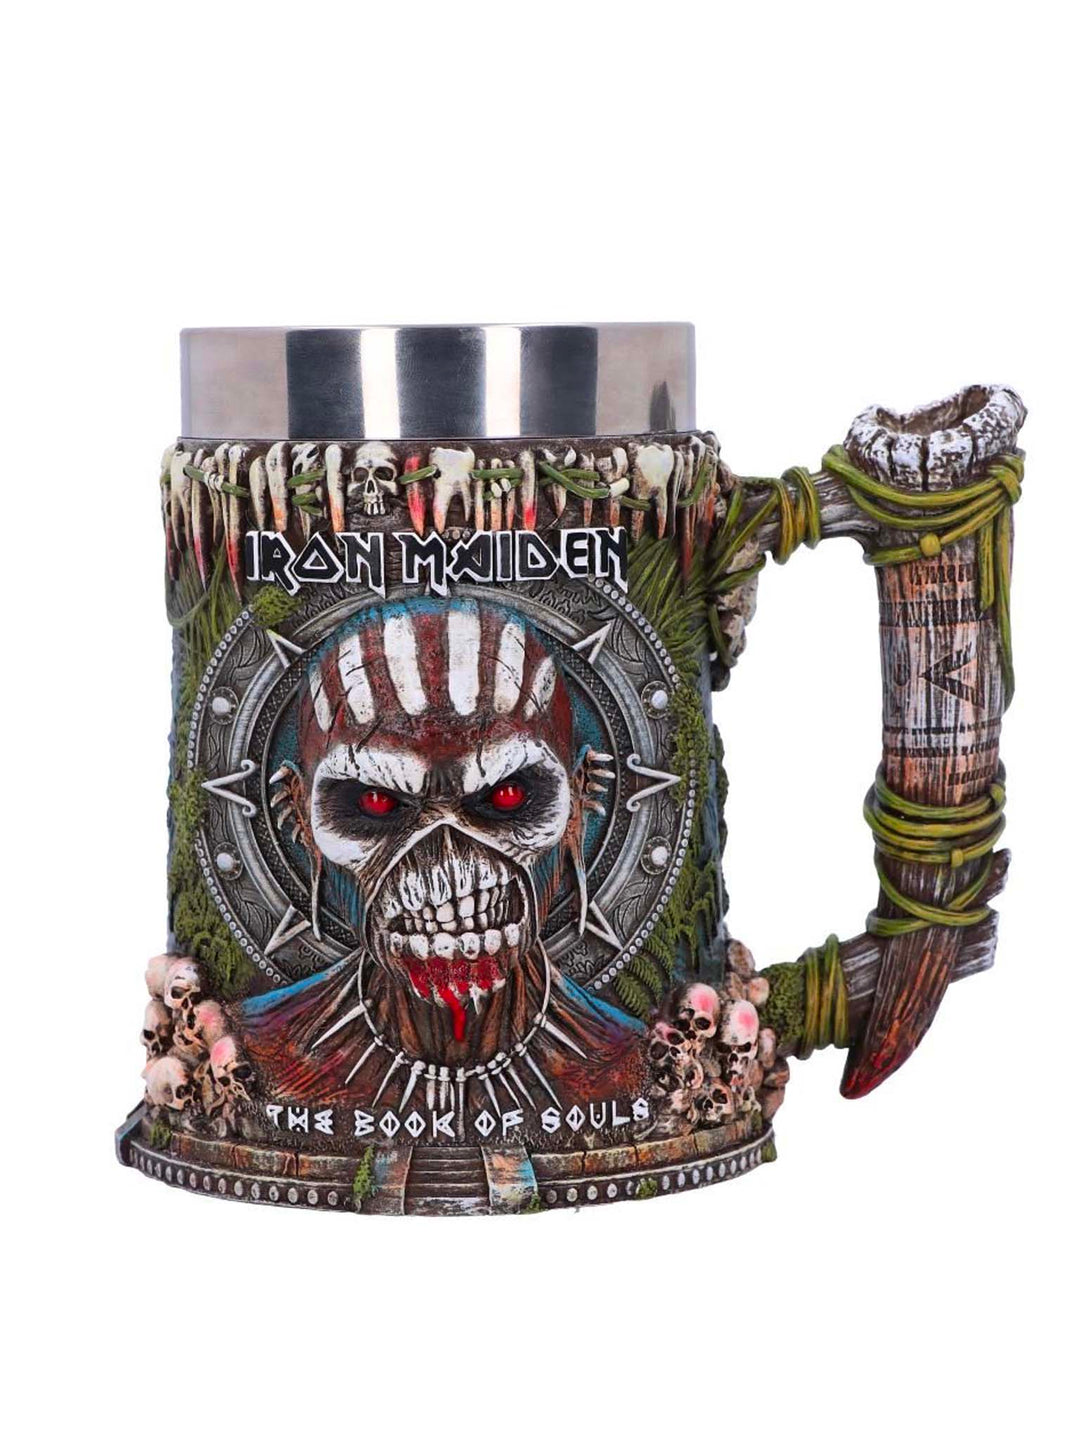 Officially licensed Iron Maiden tankard collection 